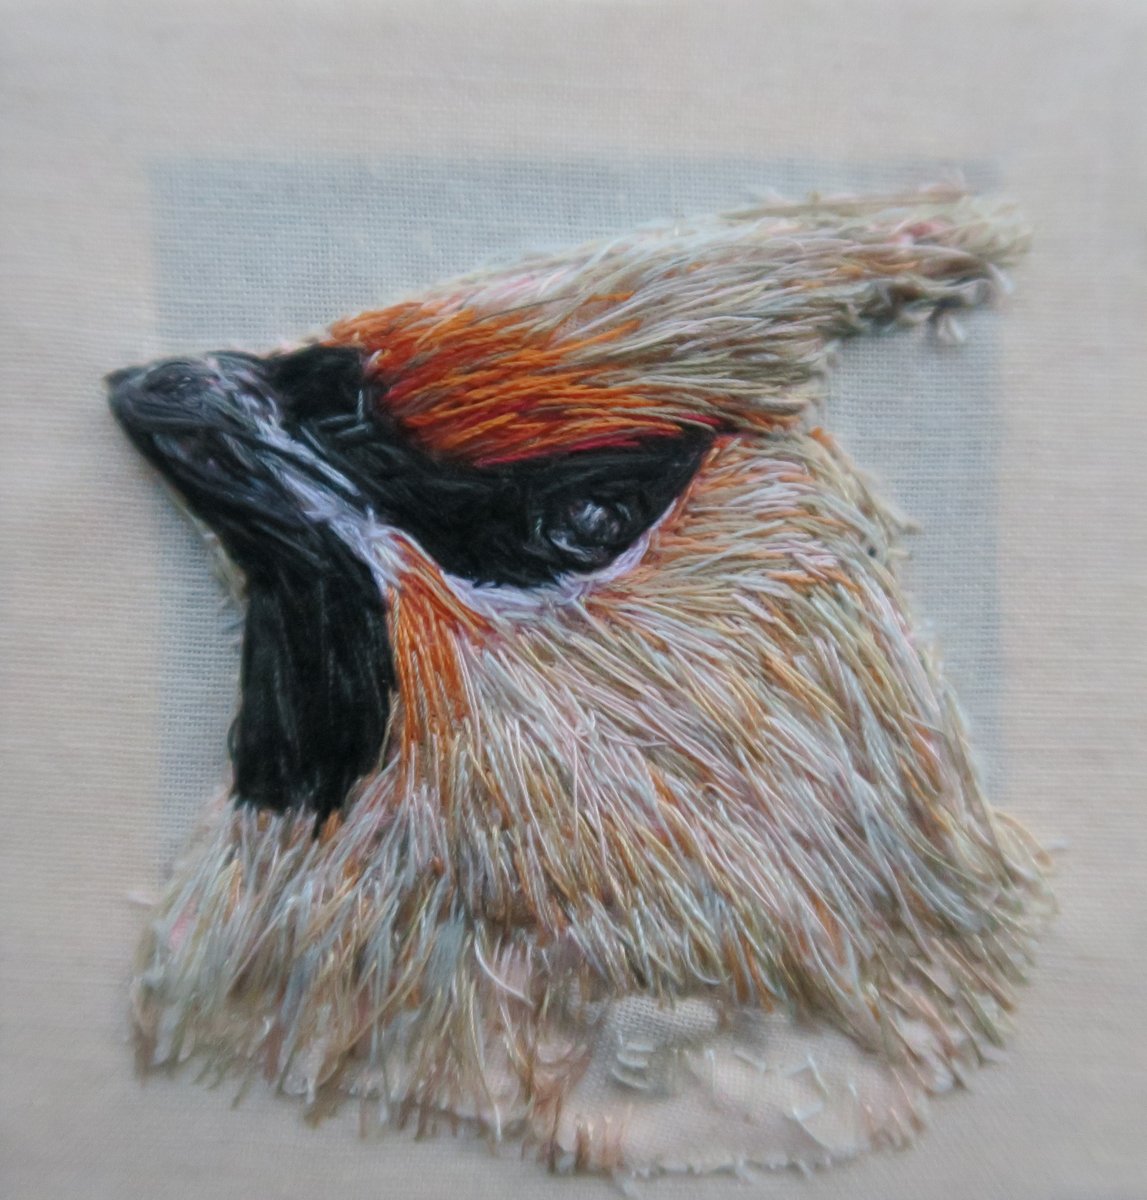 Waxwing miniature bird thread painting, hand embroidered artwork. Comes in a white frame. emilytull.co.uk/store/p157/wax… #EarlyBiz #MHHSBD